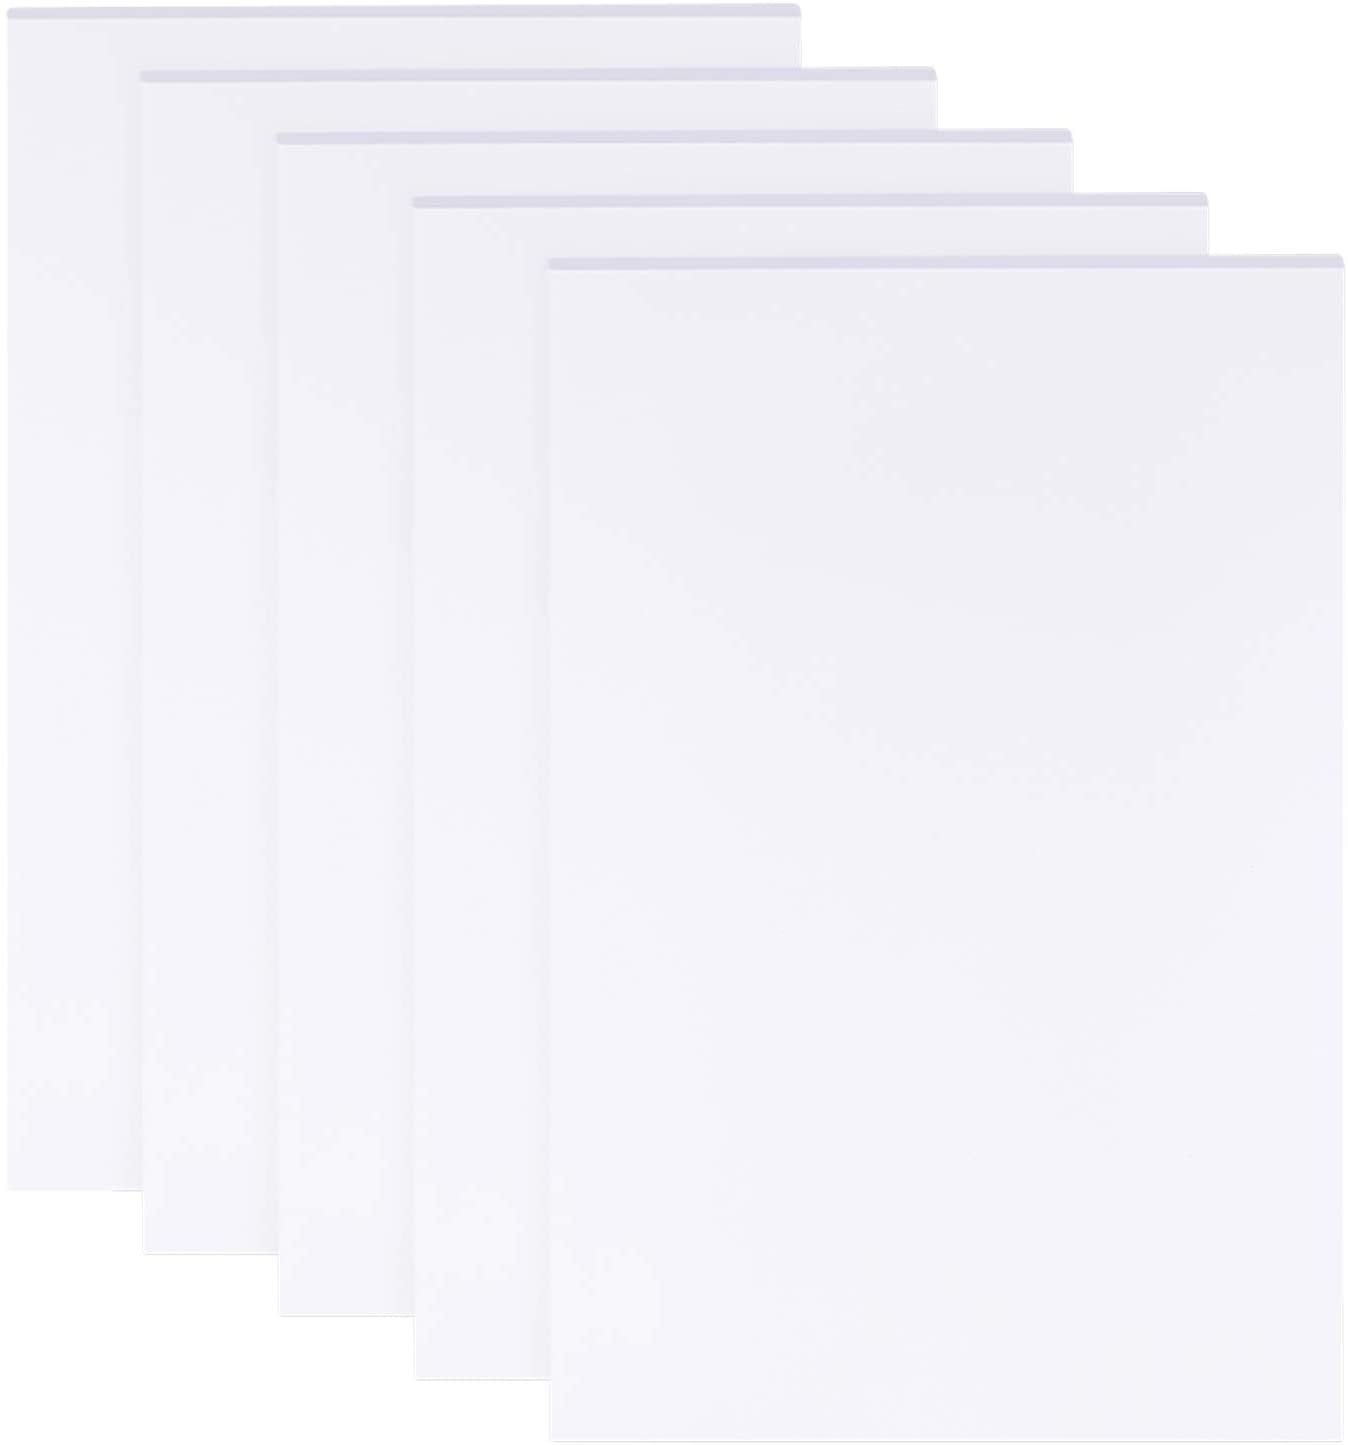 Crescent 405111 Professional Grade Illustration Board, Heavy Weight, 15 inch x 20 inch size, 14-Ply Thickness, White